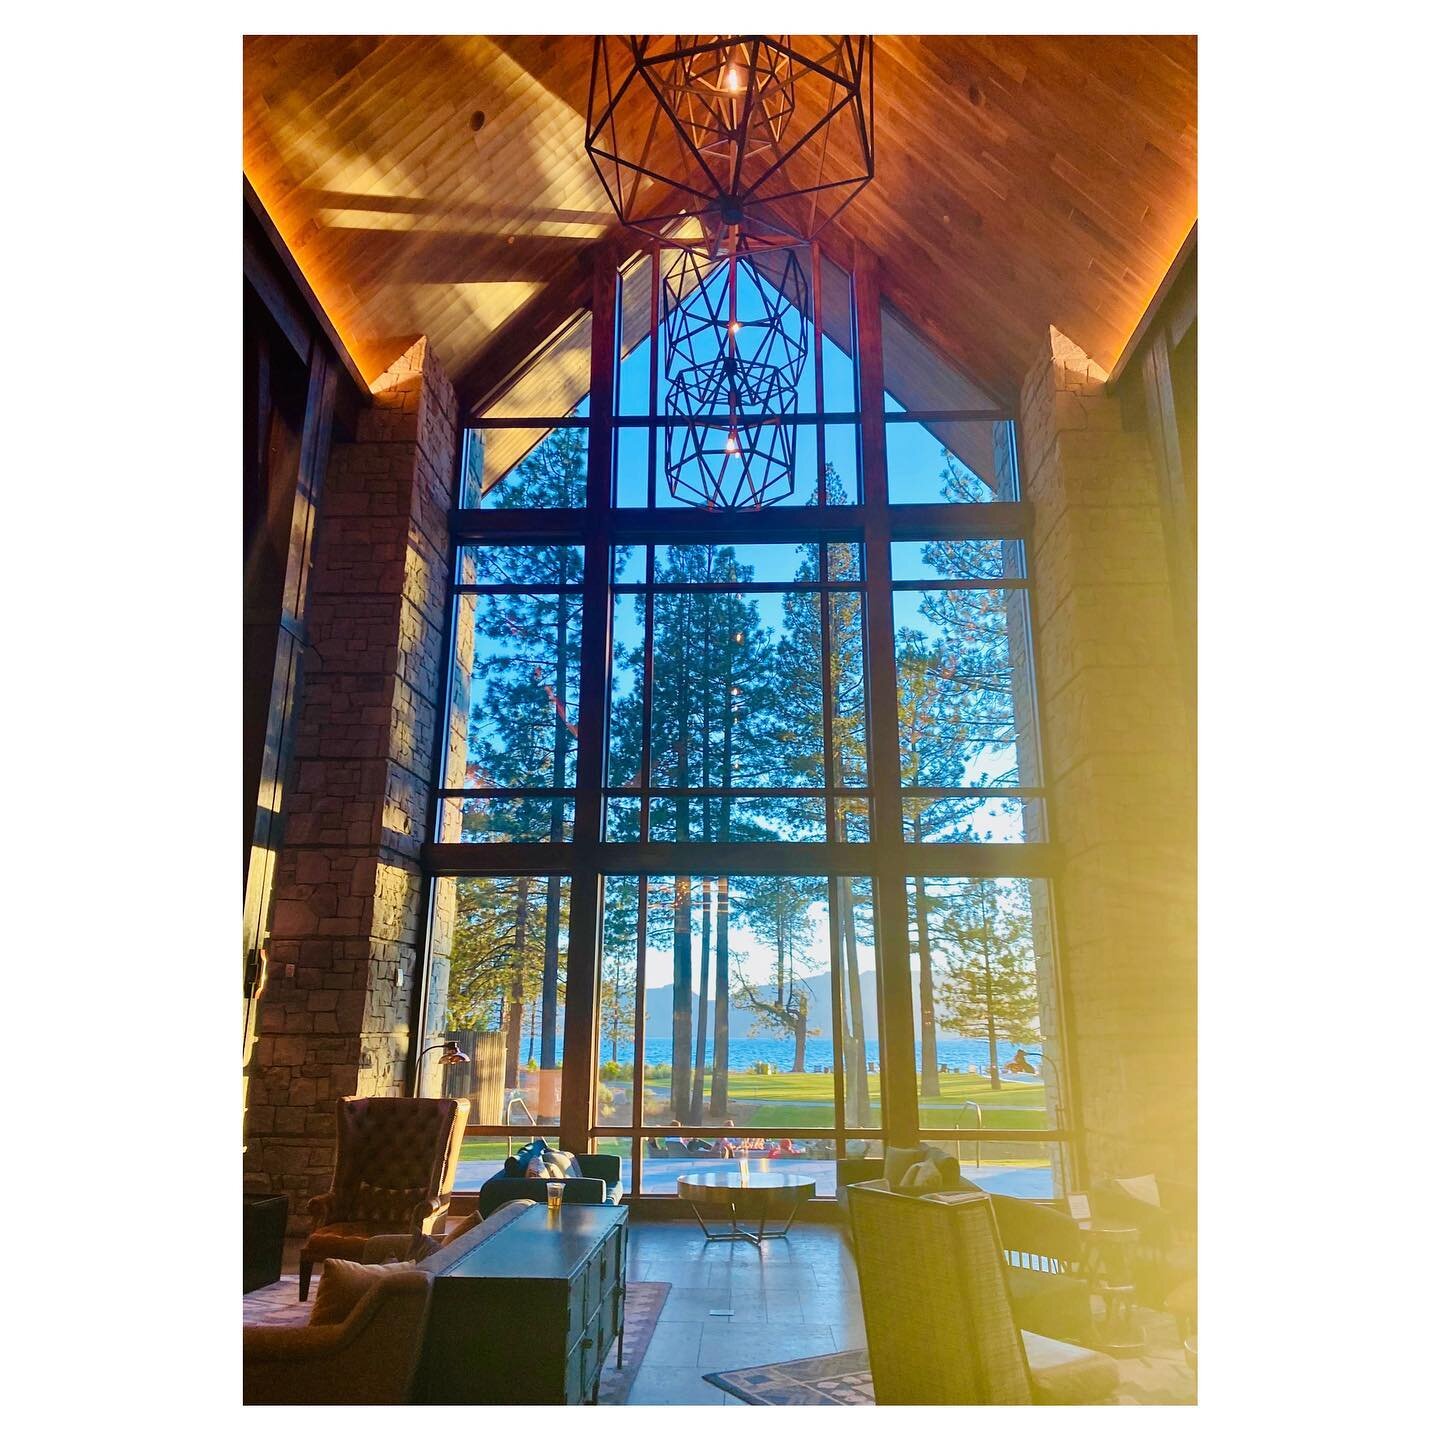 @edgewoodtahoe is beautiful &amp; so relaxing! Happy 4th! 💥#architecture #design #hospitality 🧡